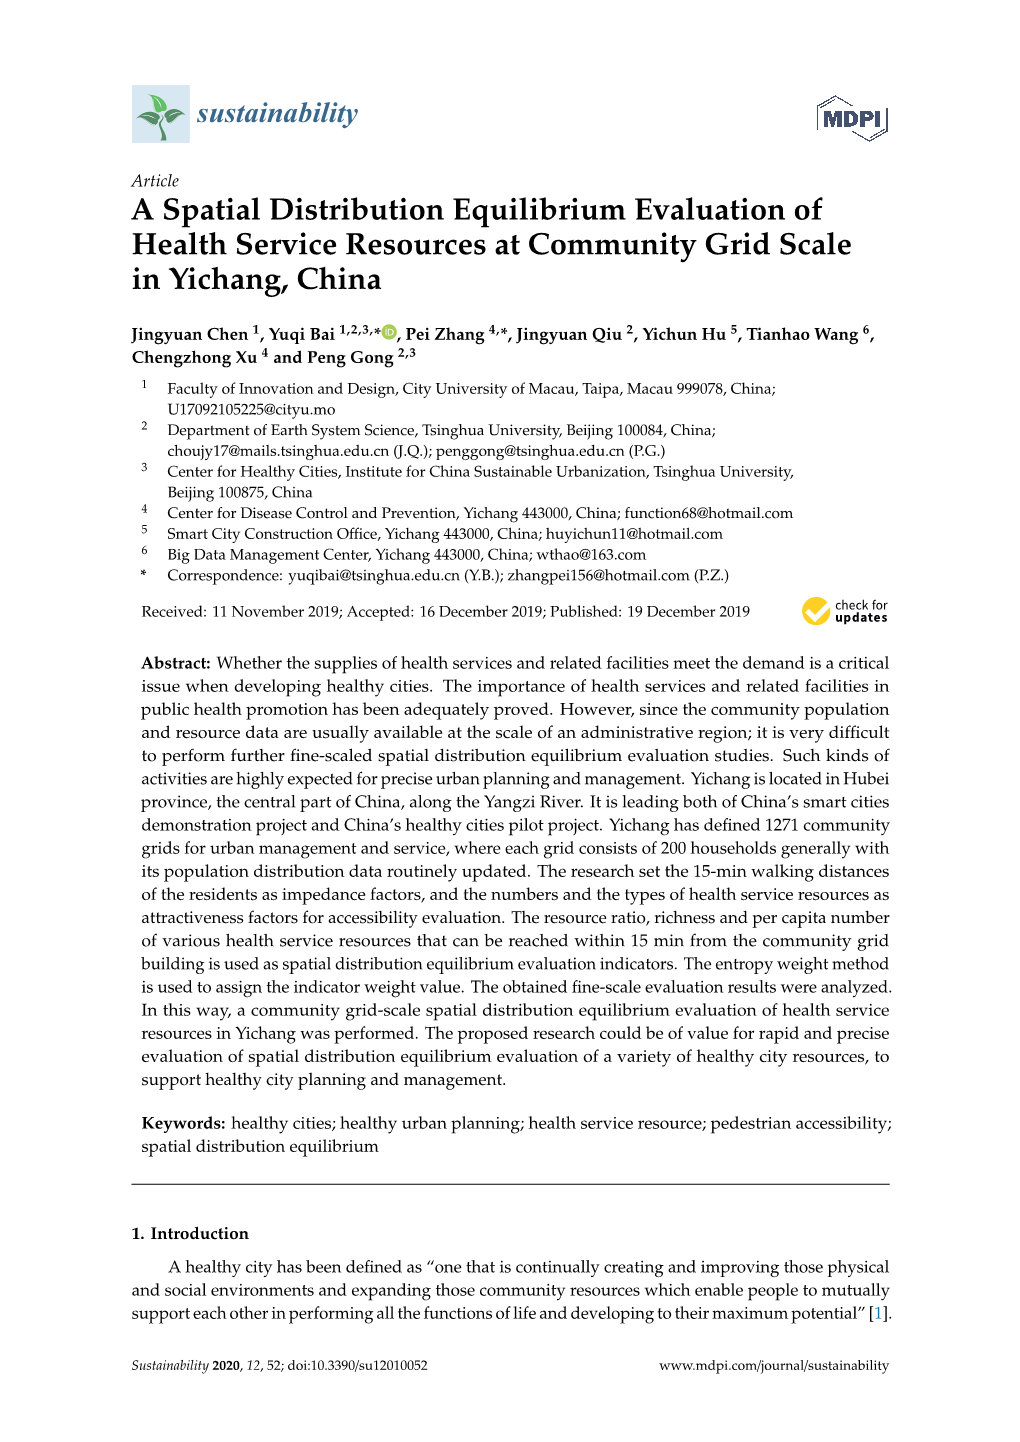 A Spatial Distribution Equilibrium Evaluation of Health Service Resources at Community Grid Scale in Yichang, China